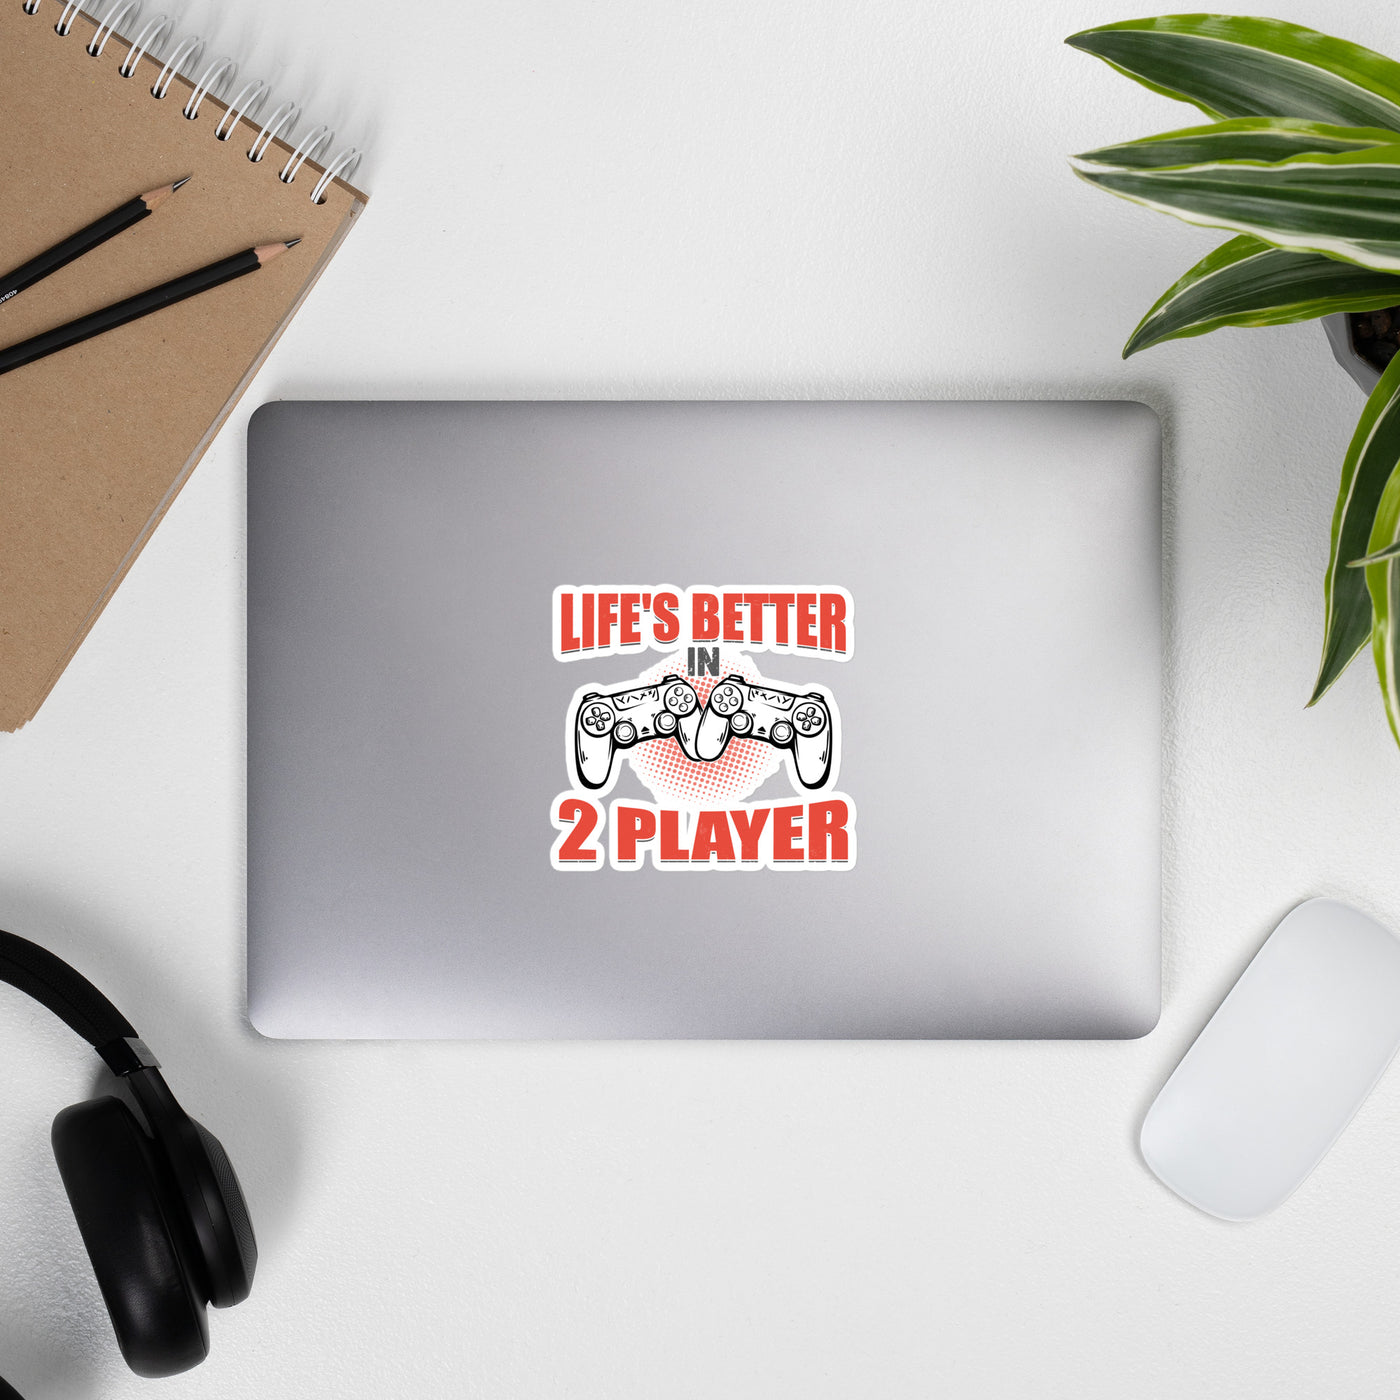 Life's Better in Two Players - Bubble-free stickers